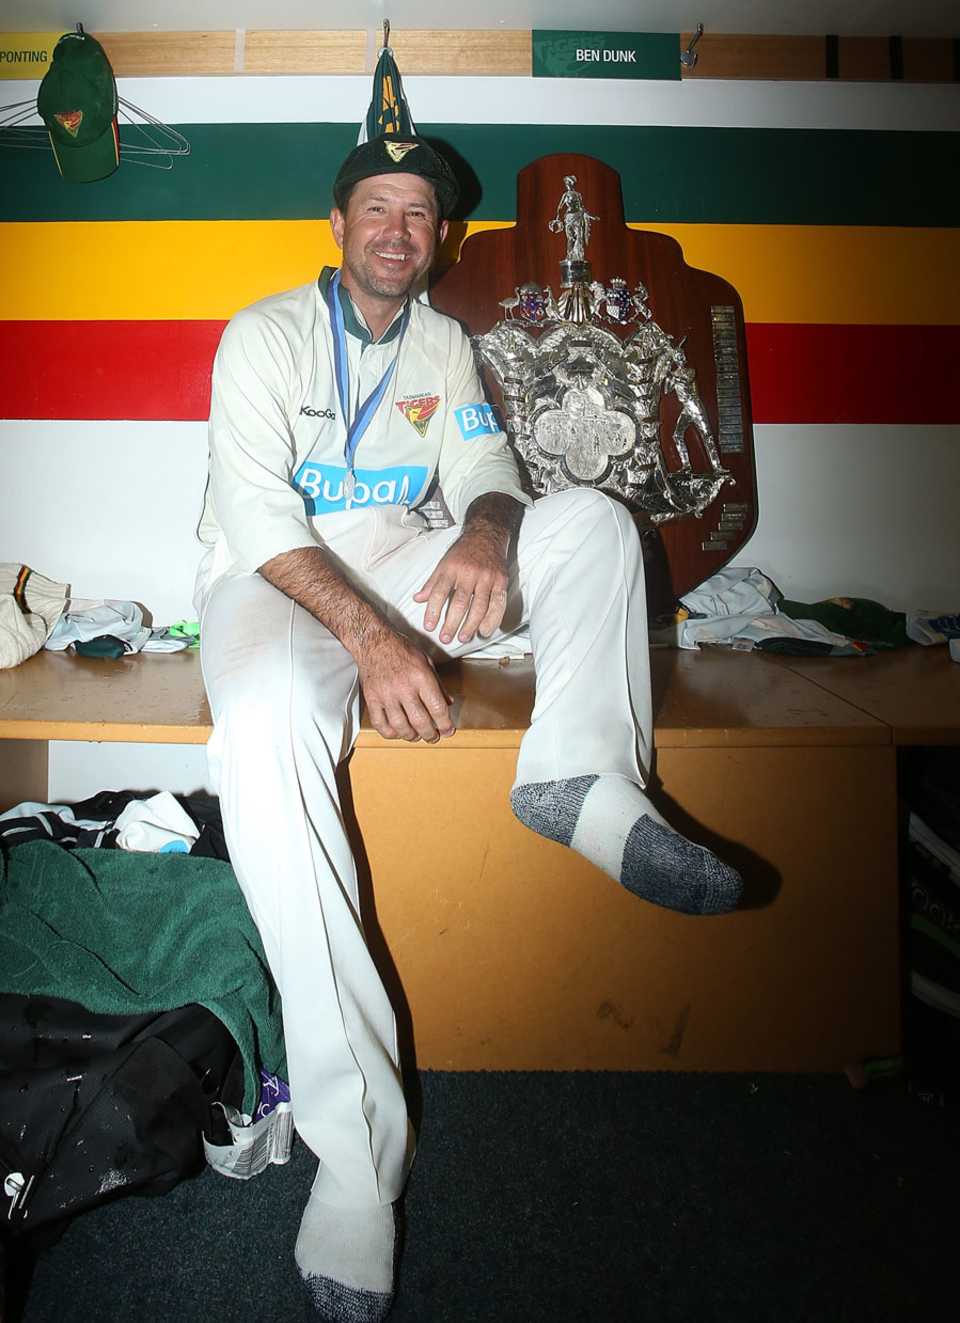 Ricky Ponting with the Sheffield Shield after Tasmania won the title on Tuesday. This is Ponting's first Shield title, Tasmania v Queensland, Sheffield Shield final, 5th day, Hobart, March 26, 2013